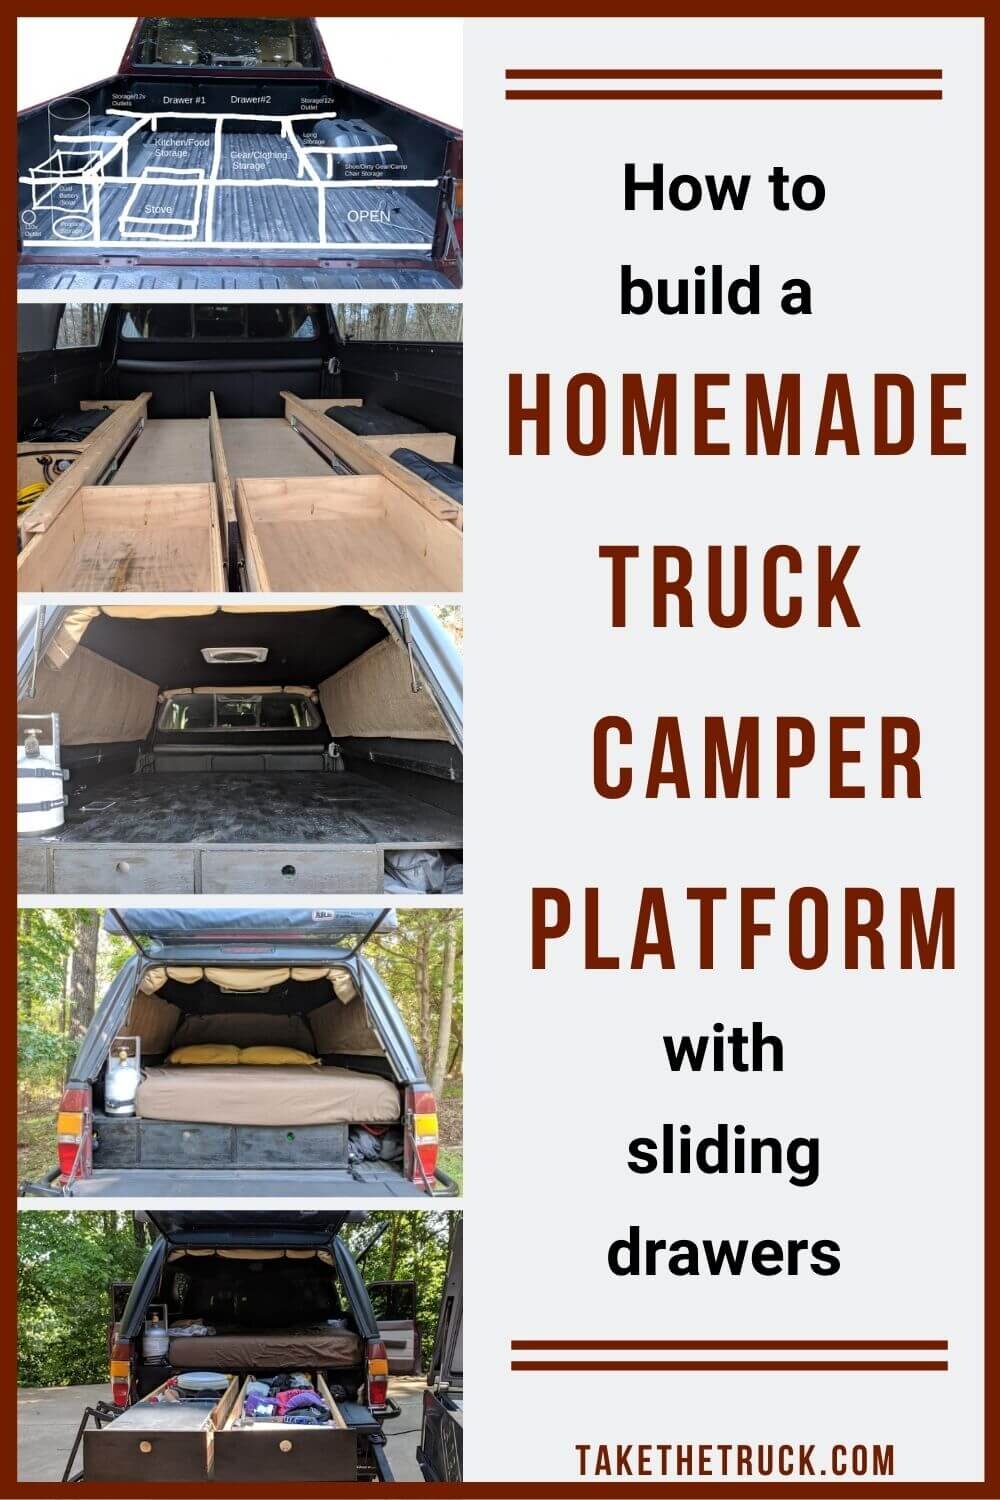 Detailed truck camper plans and diagrams to build an awesome truck bed camping platform for sleeping with truck bed drawers for storage. DIY truck camping platform build made easy!